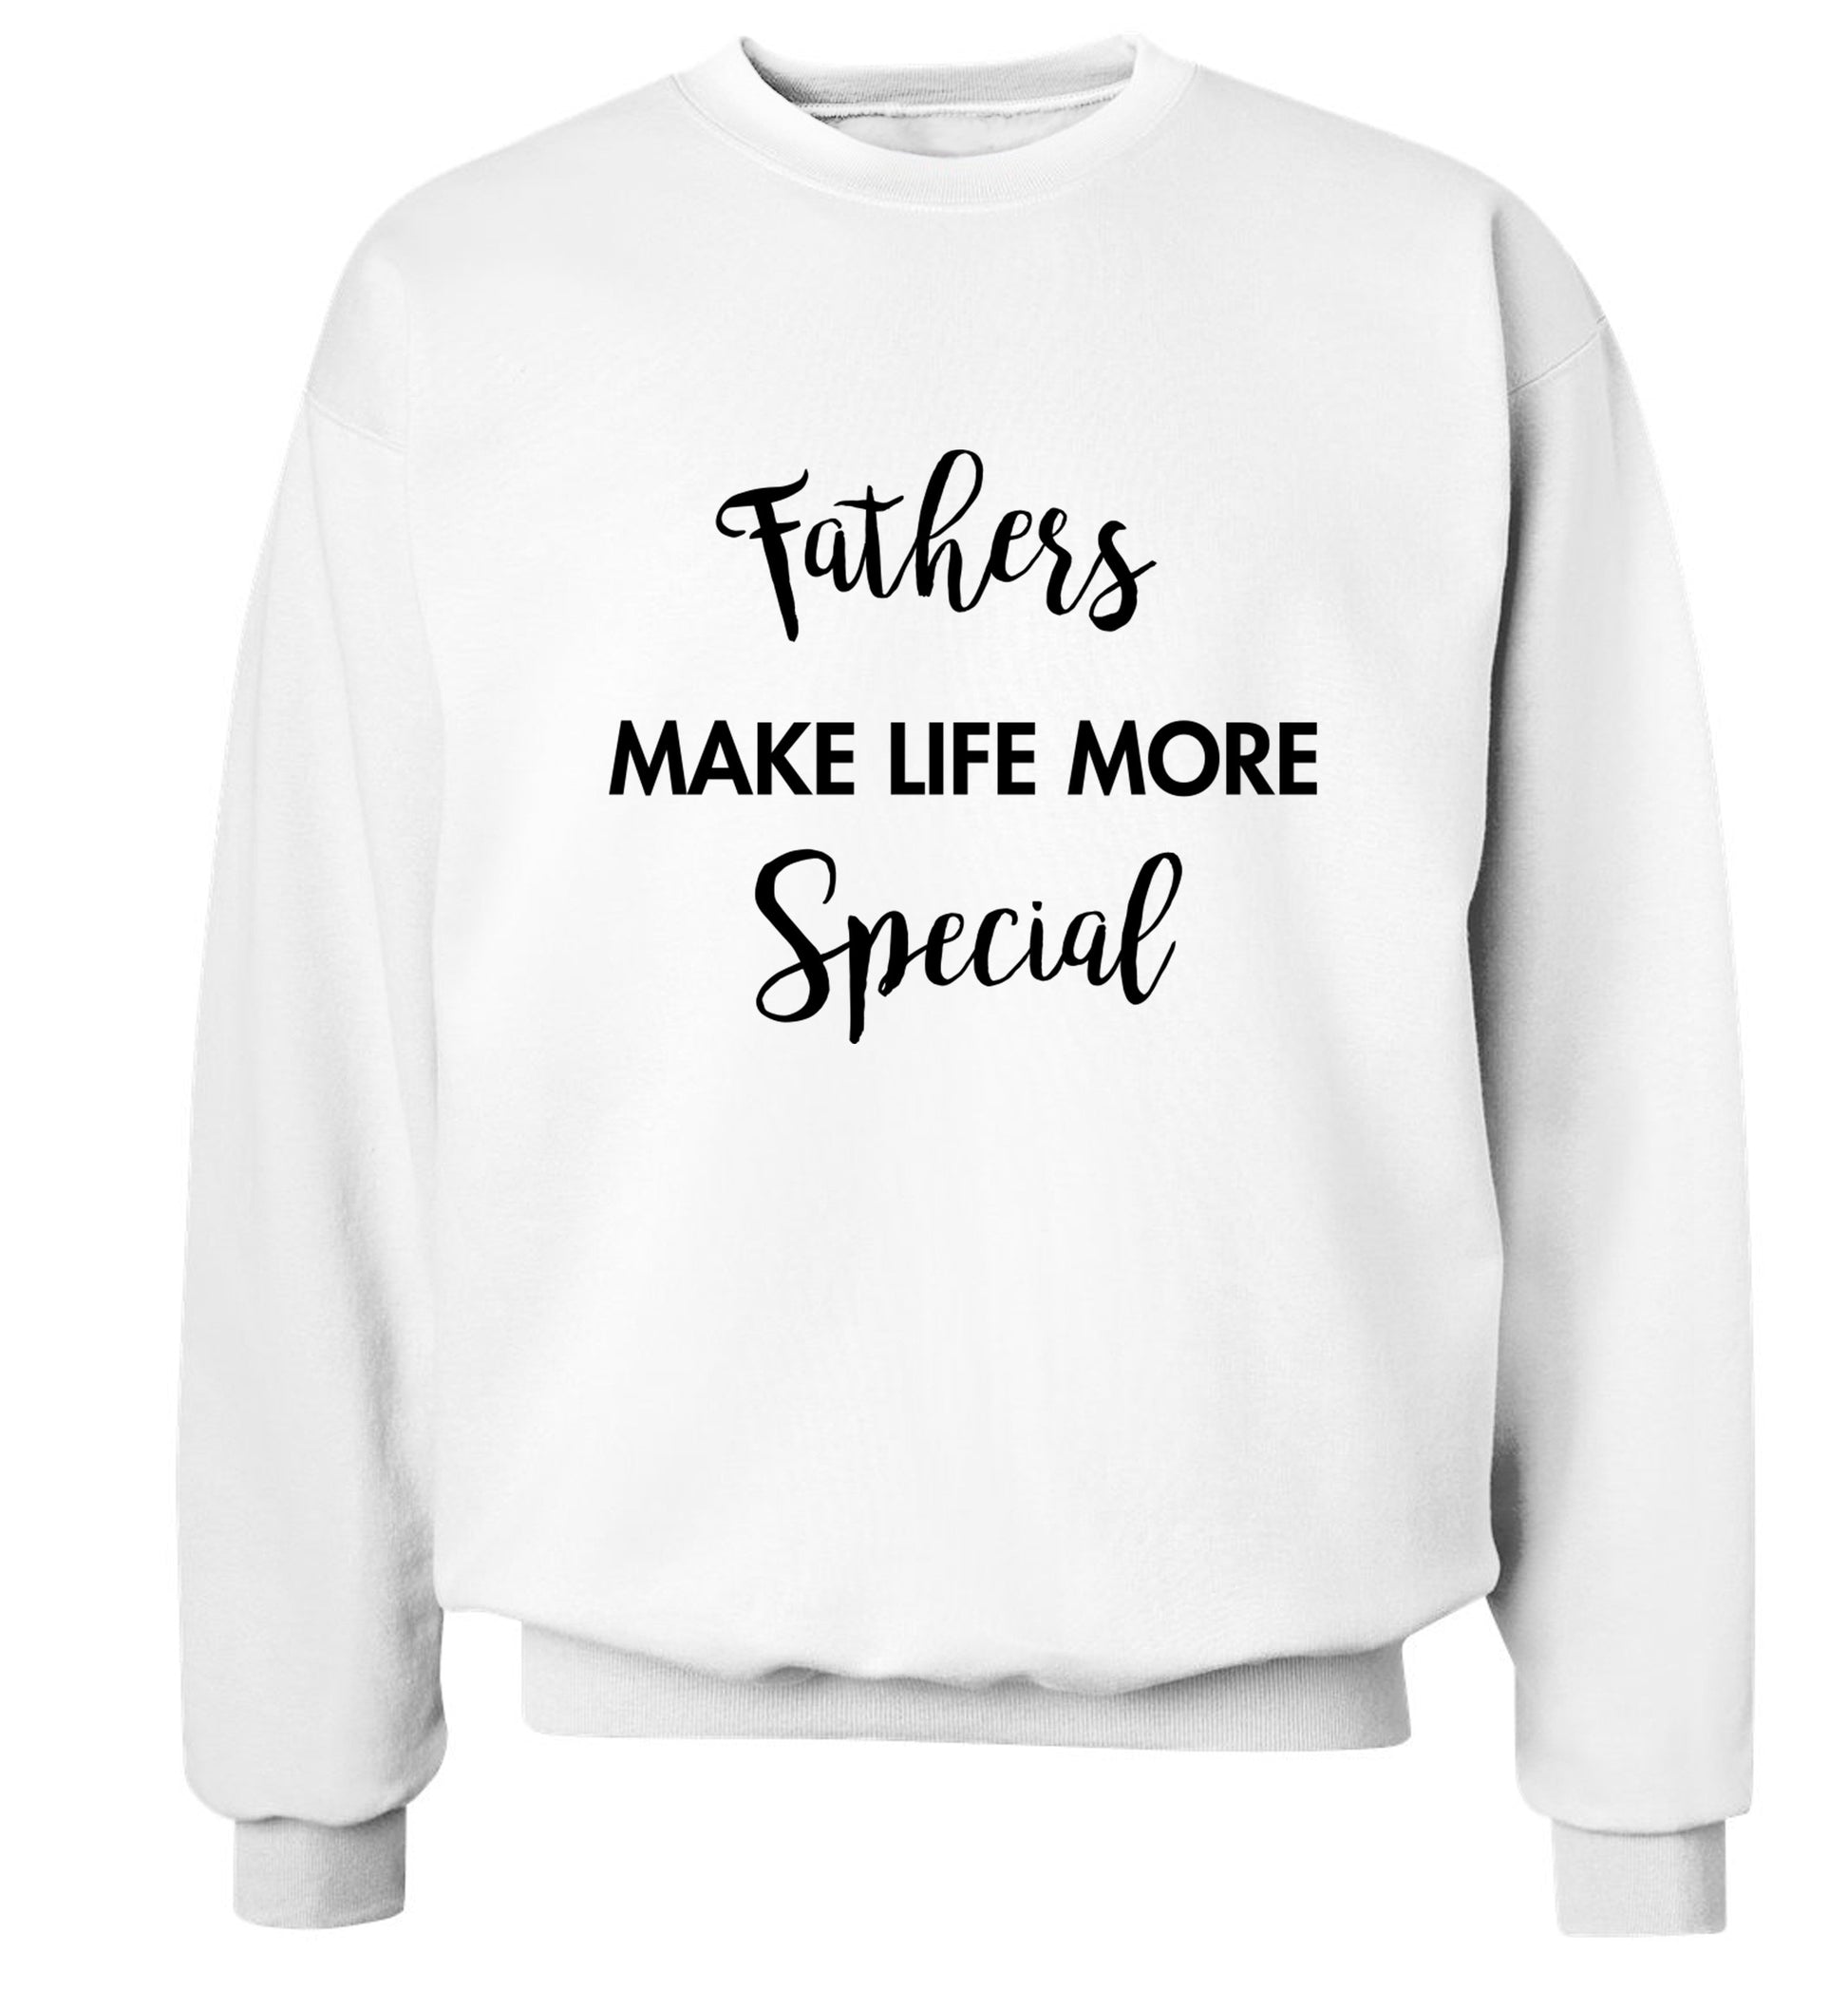 Fathers make life more special Adult's unisex white Sweater 2XL